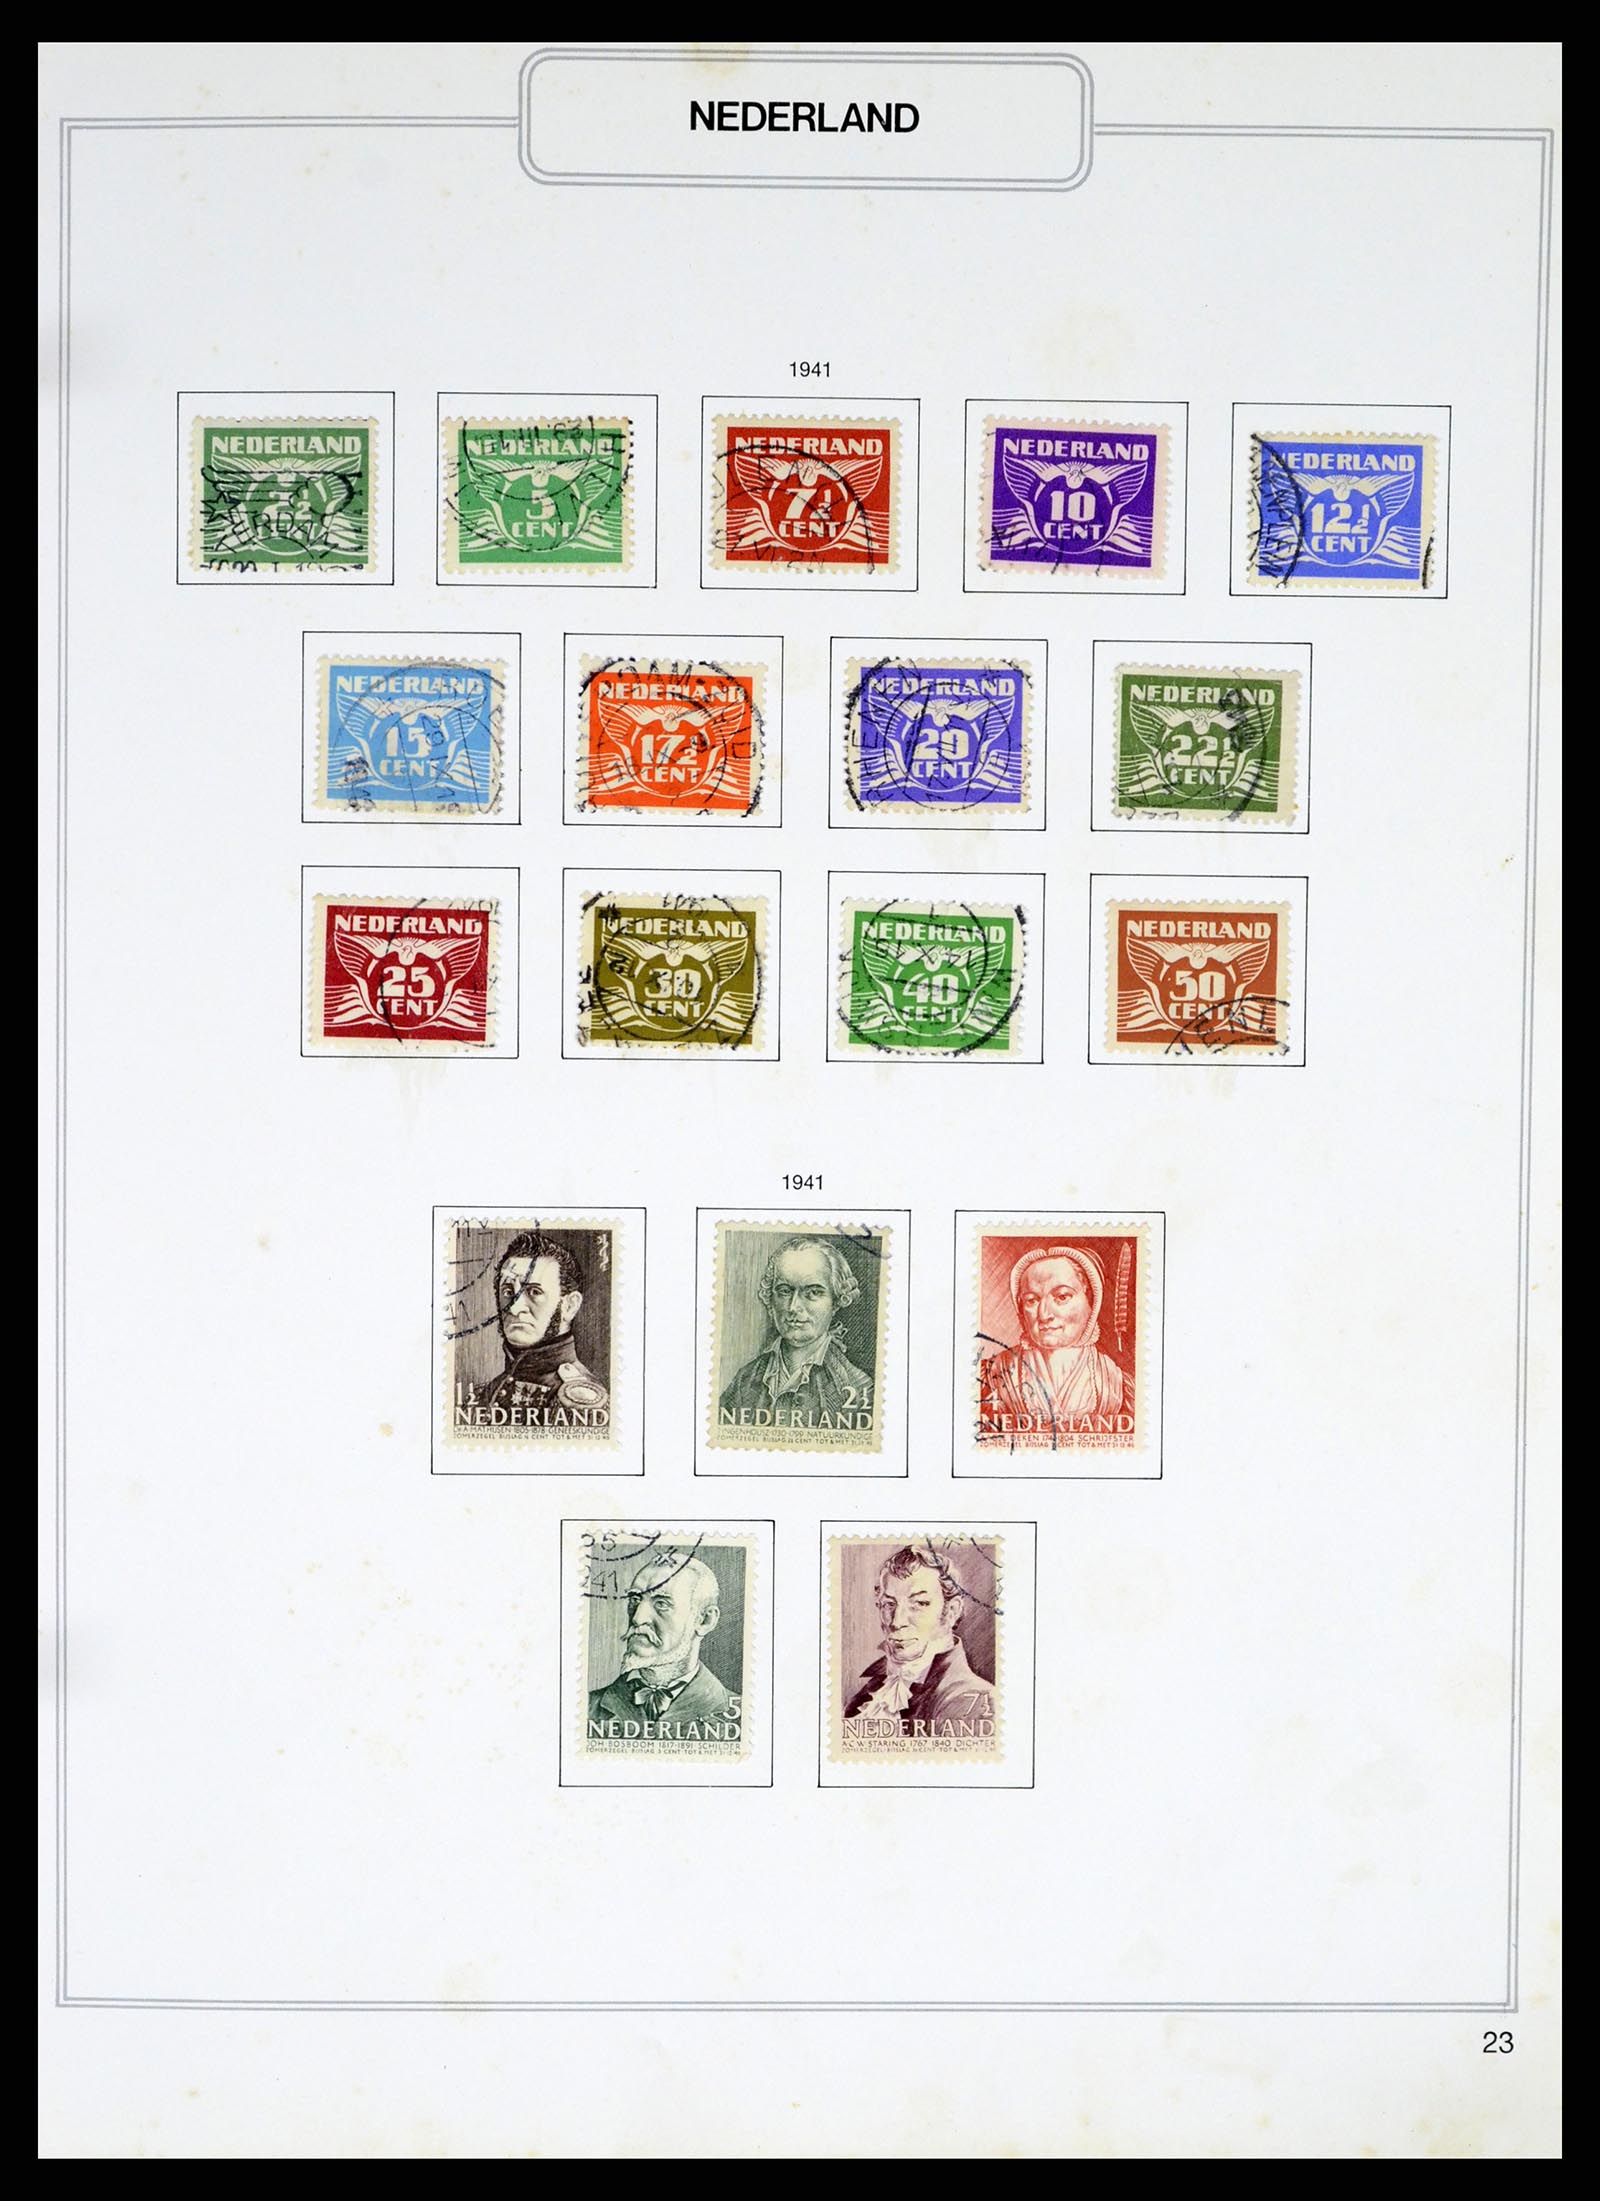 37348 023 - Stamp collection 37348 Netherlands 1852-1995.